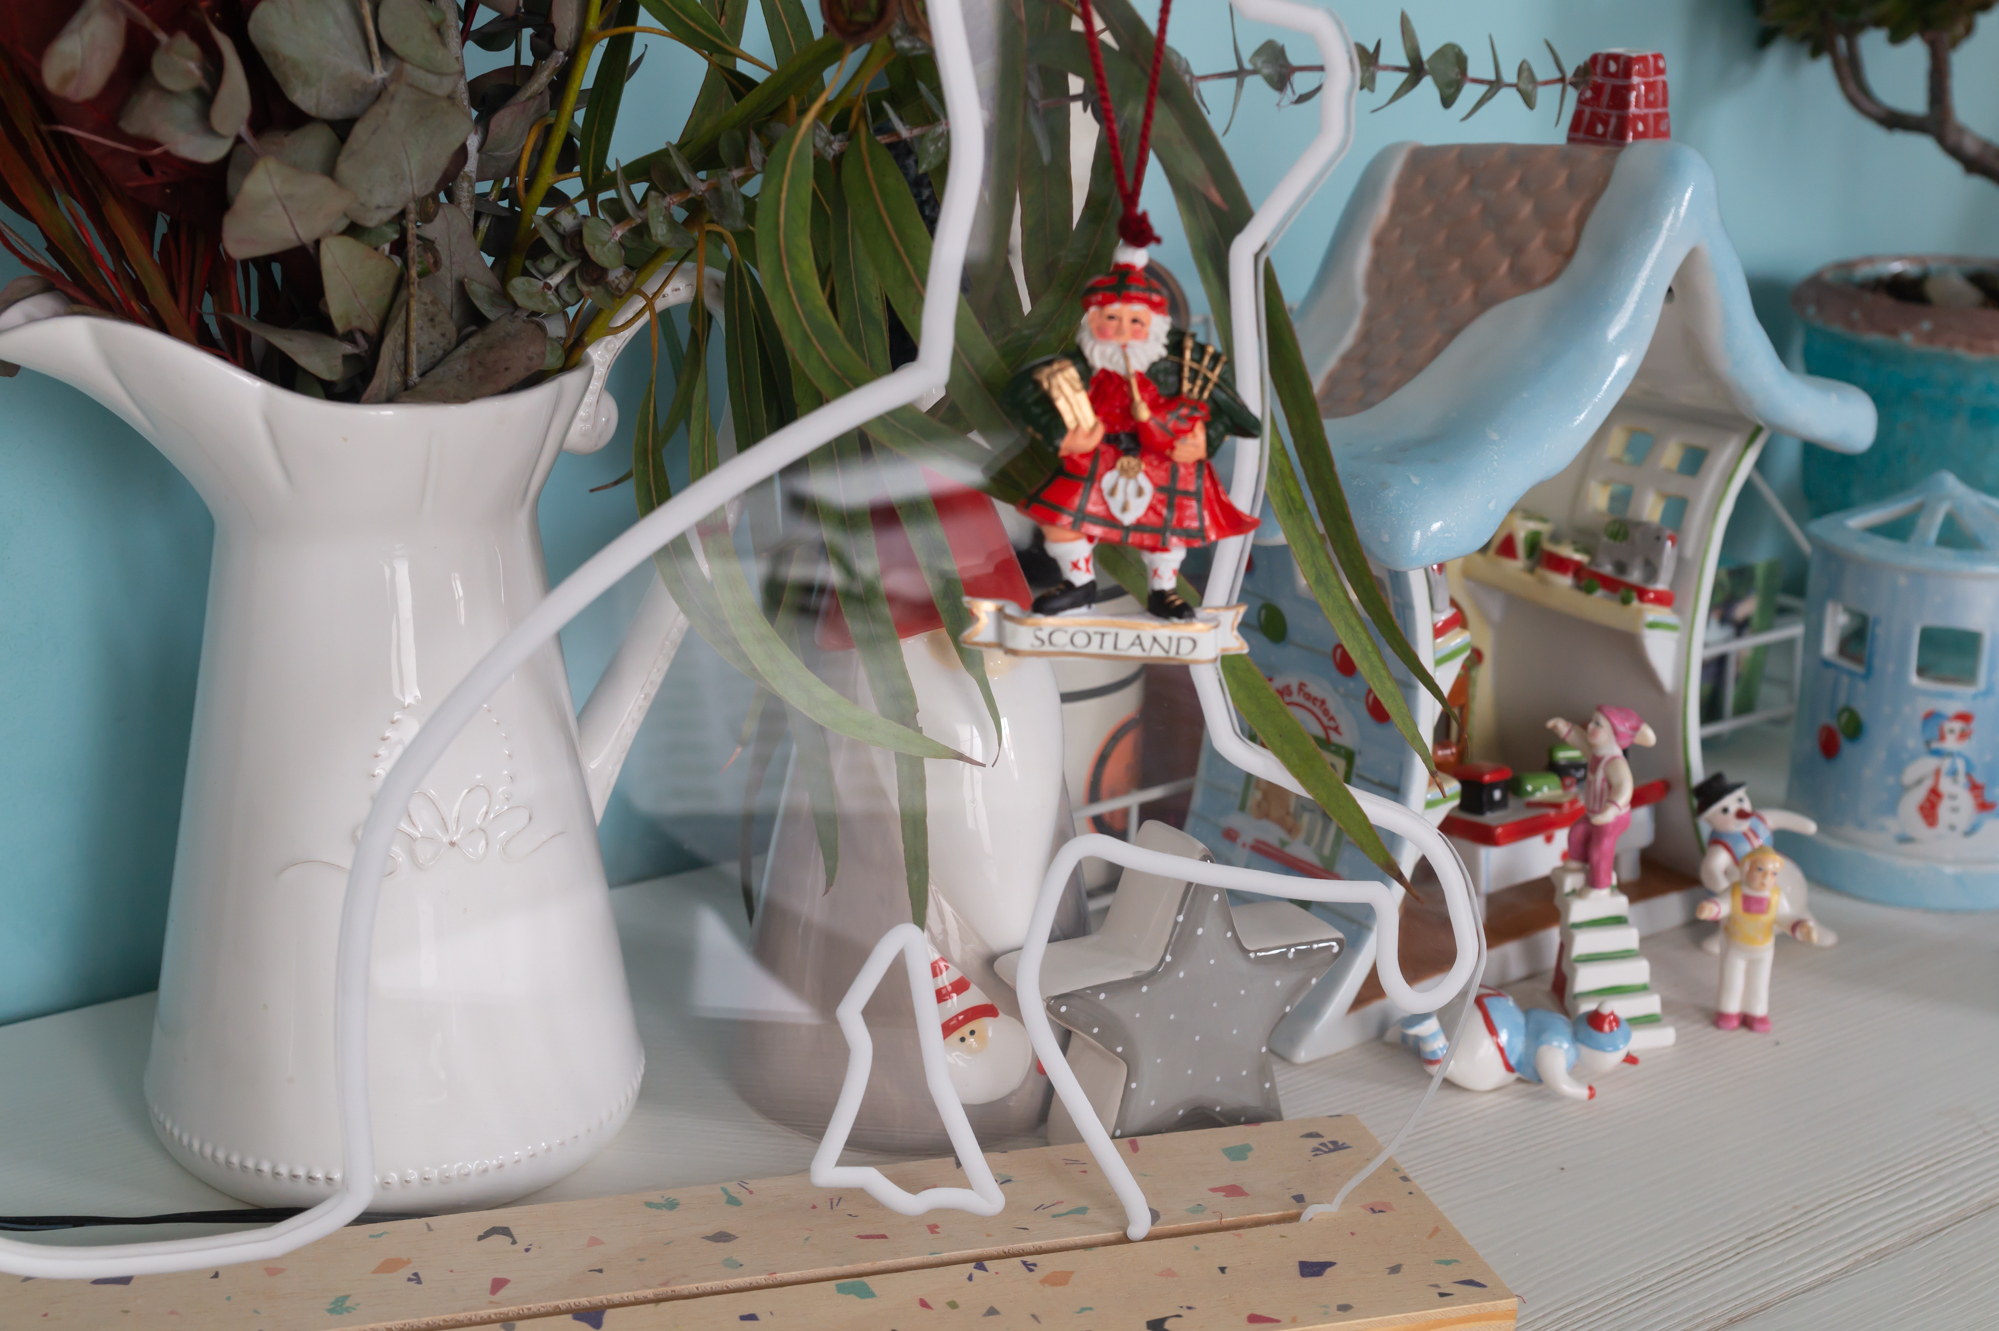 Christmas decor from Scotland and Villeroy & Boch 'Santa's Toy Factory'